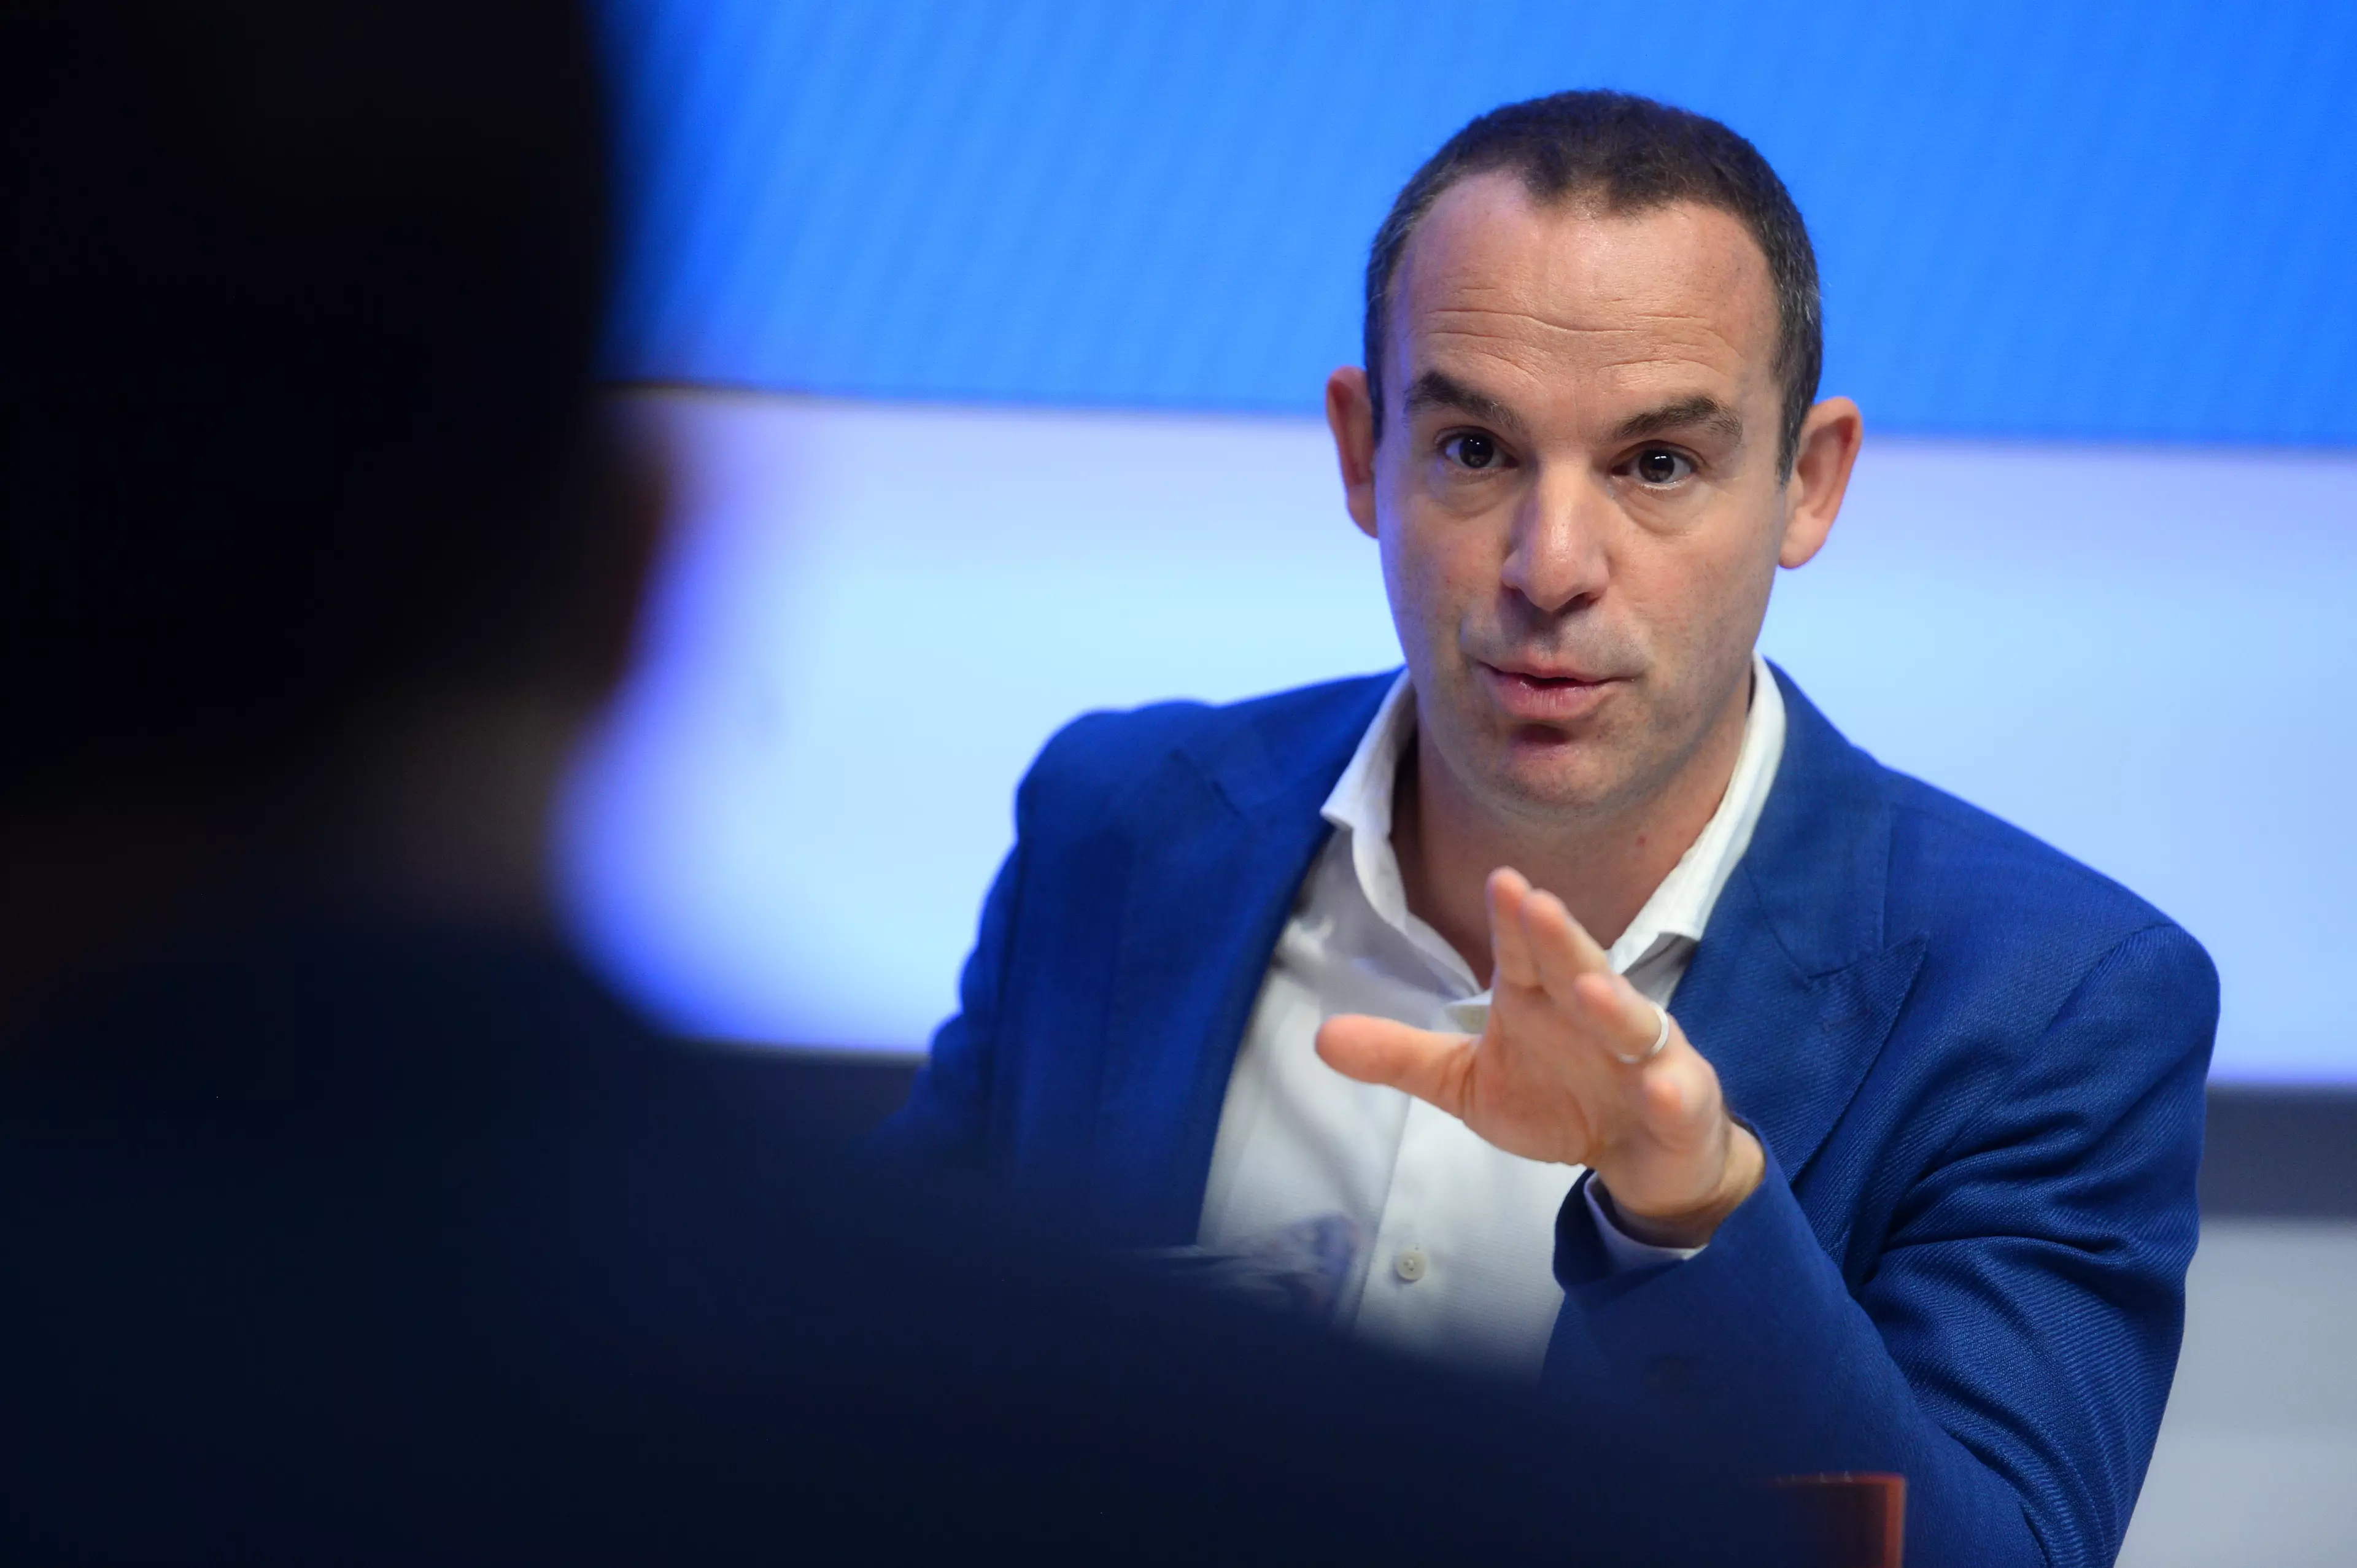 Martin Lewis has previously warned about the changes to how bank balances display.